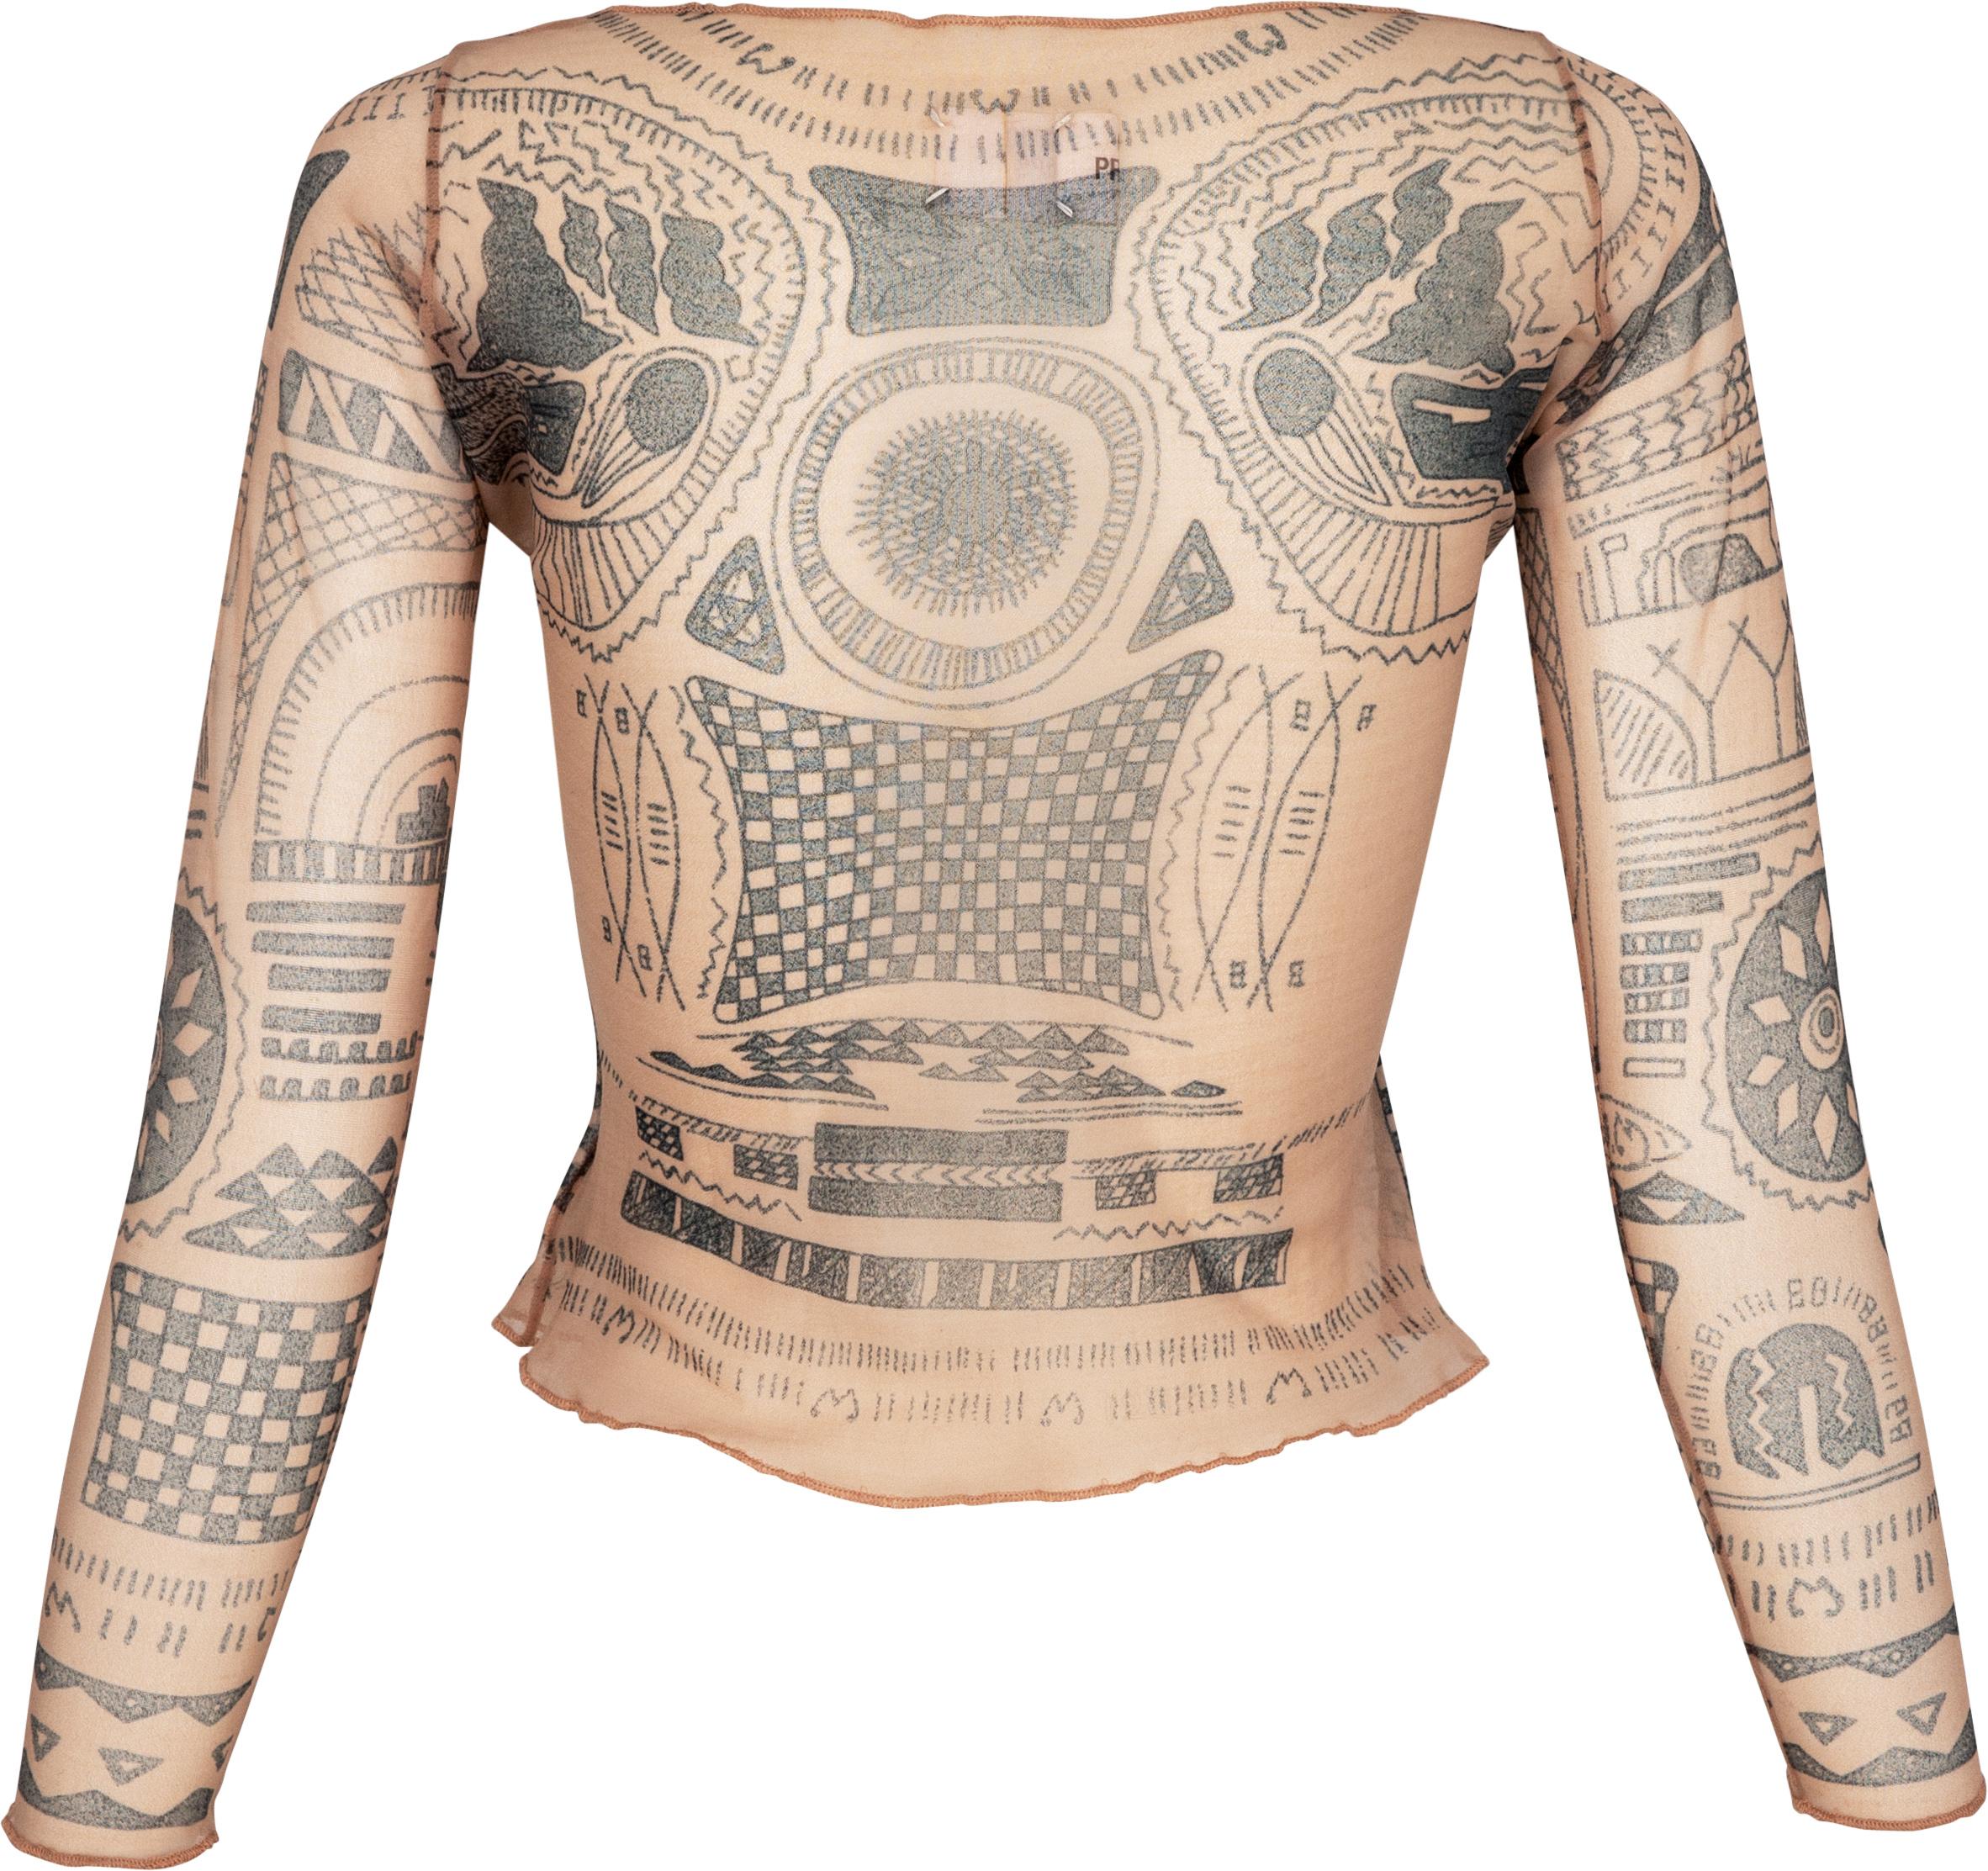 Sheer top in mesh adorned with tribal tattoo motifs from French Polynesia. Designed from Martin's first and historic runway show in 1989 and re-visited for his spring 1994 